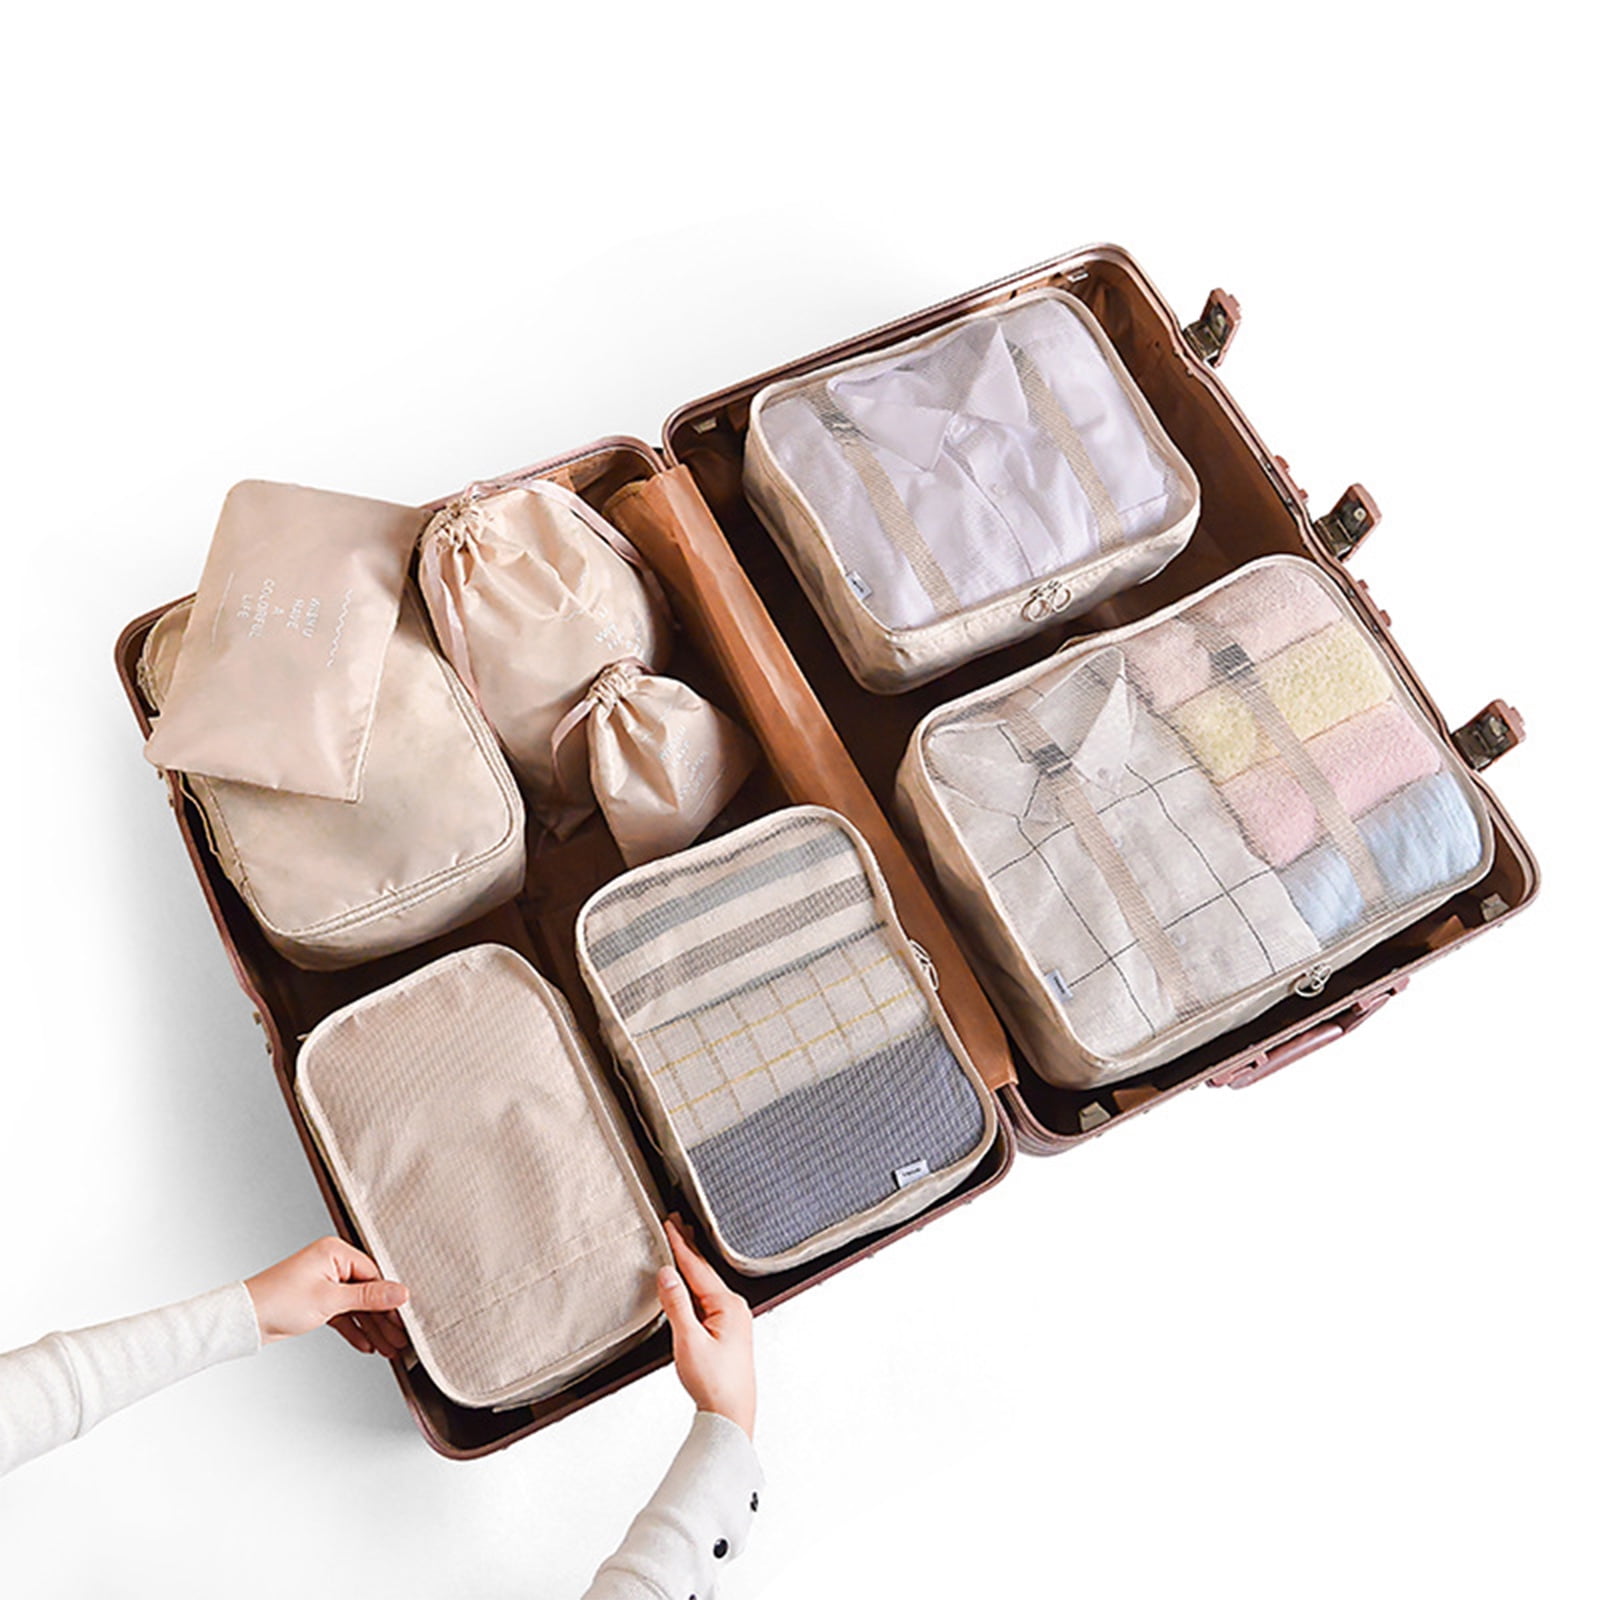 FlexiPods 7-Piece Compression Packing Cube Set: Your Go-To Travel Organizer  with Expandable Mesh Bags and Electronic Storage - Vysta Home